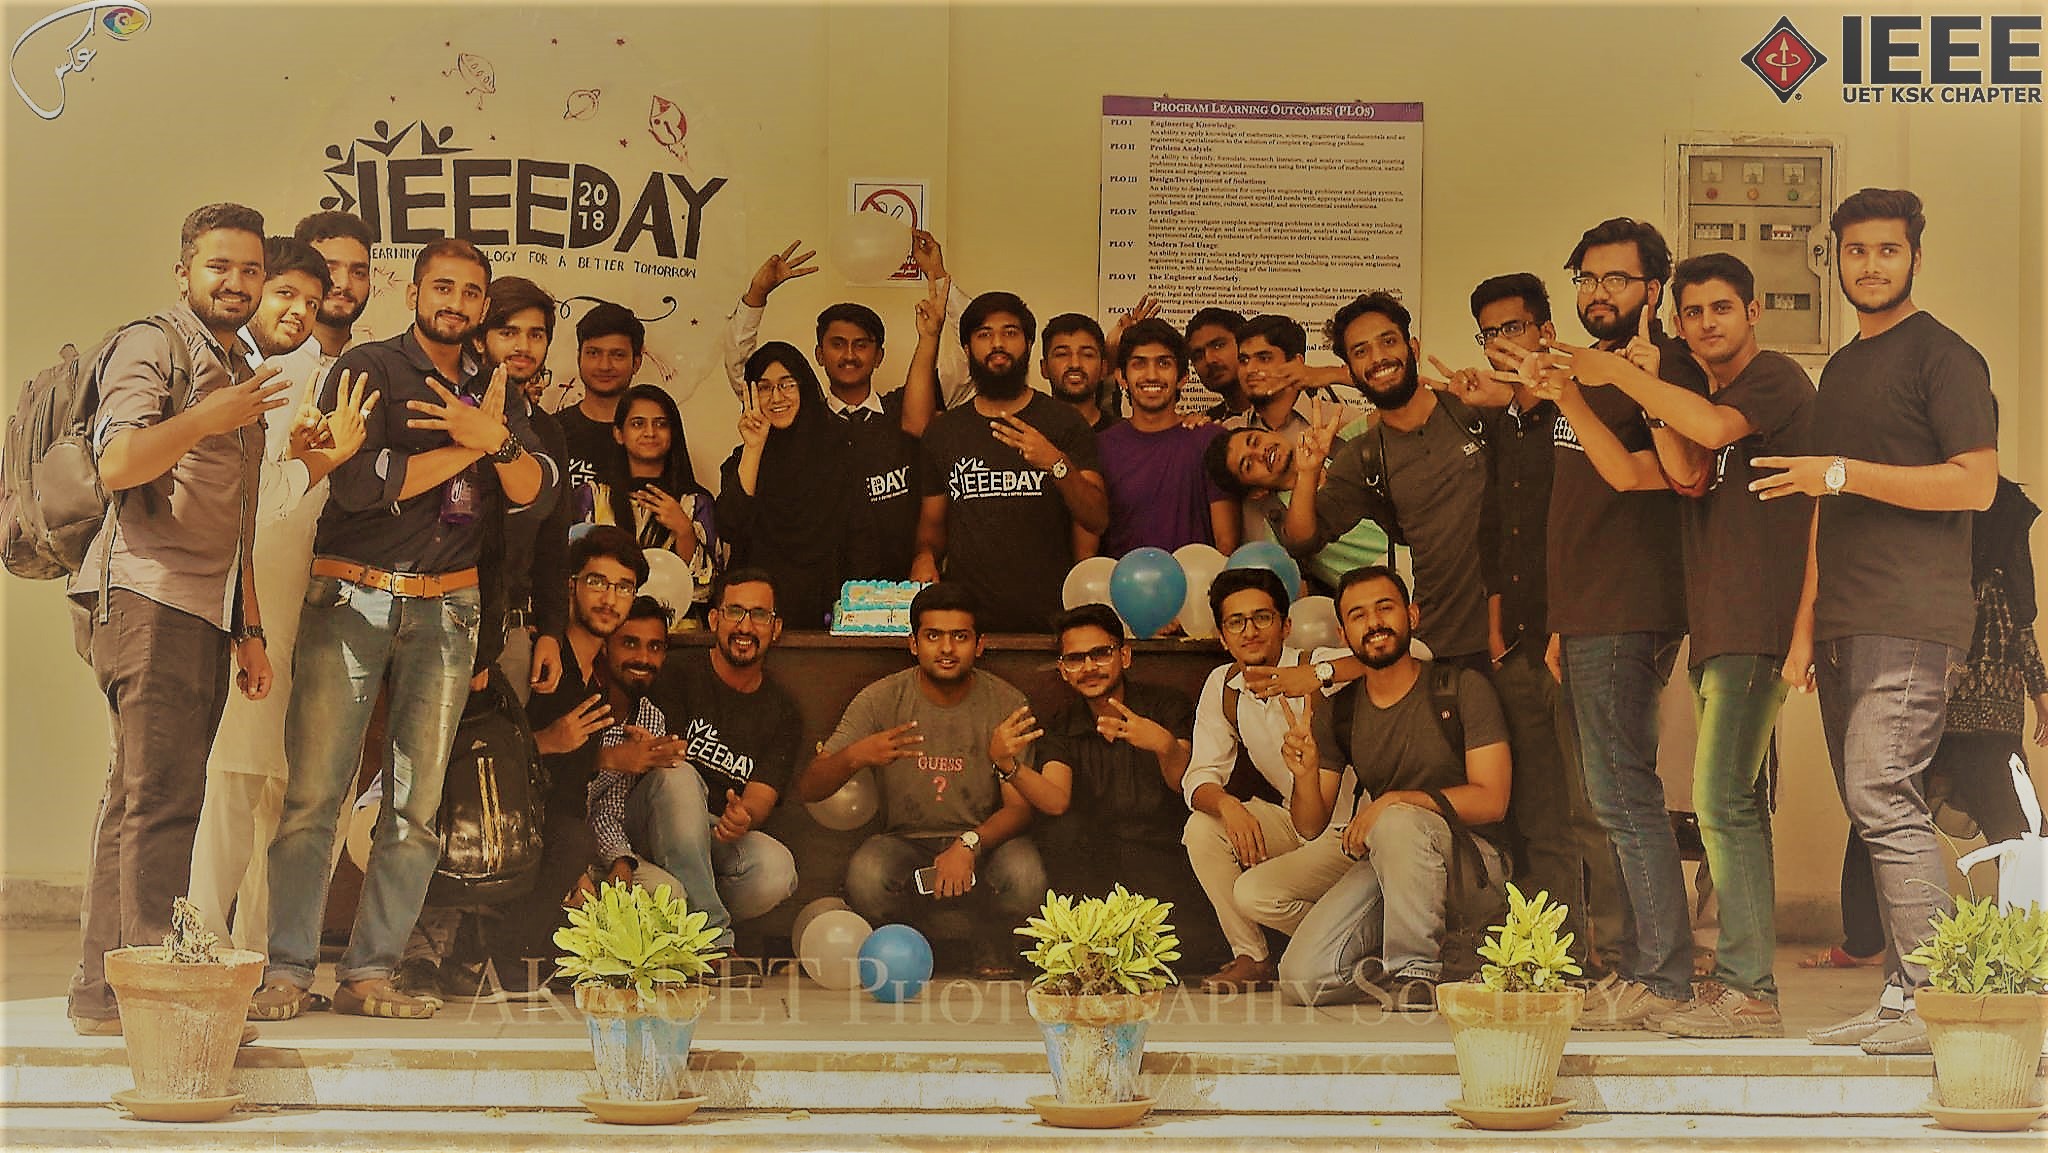 IEEE-DAY CELEBRATIONs